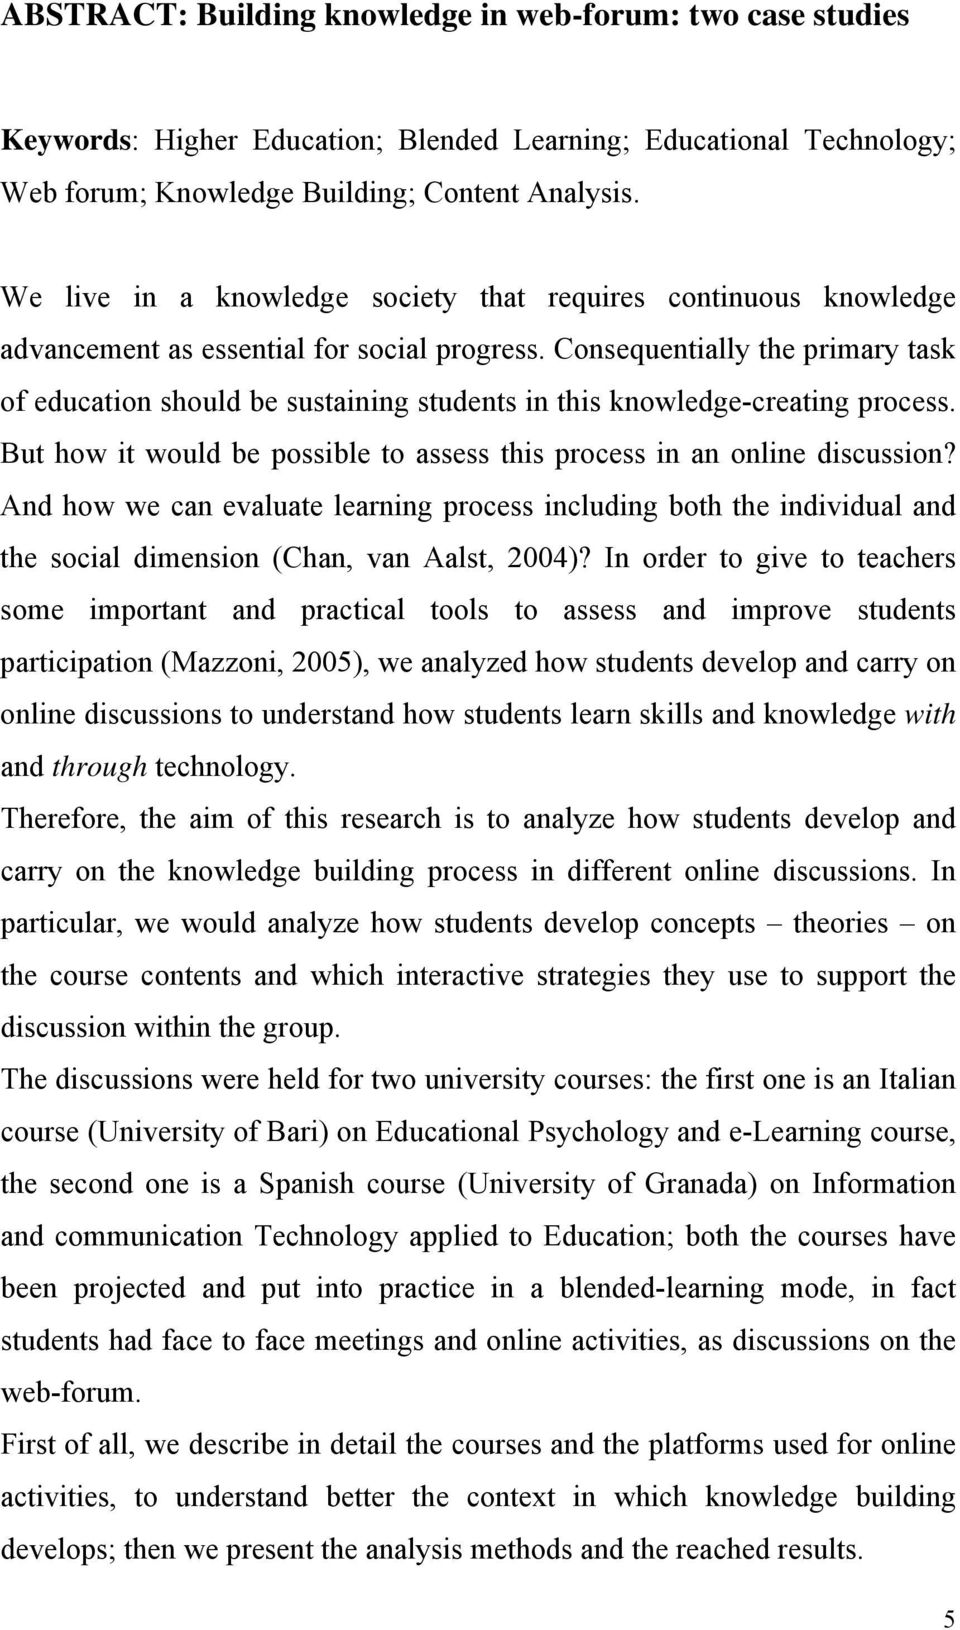 Consequentially the primary task of education should be sustaining students in this knowledge-creating process. But how it would be possible to assess this process in an online discussion?